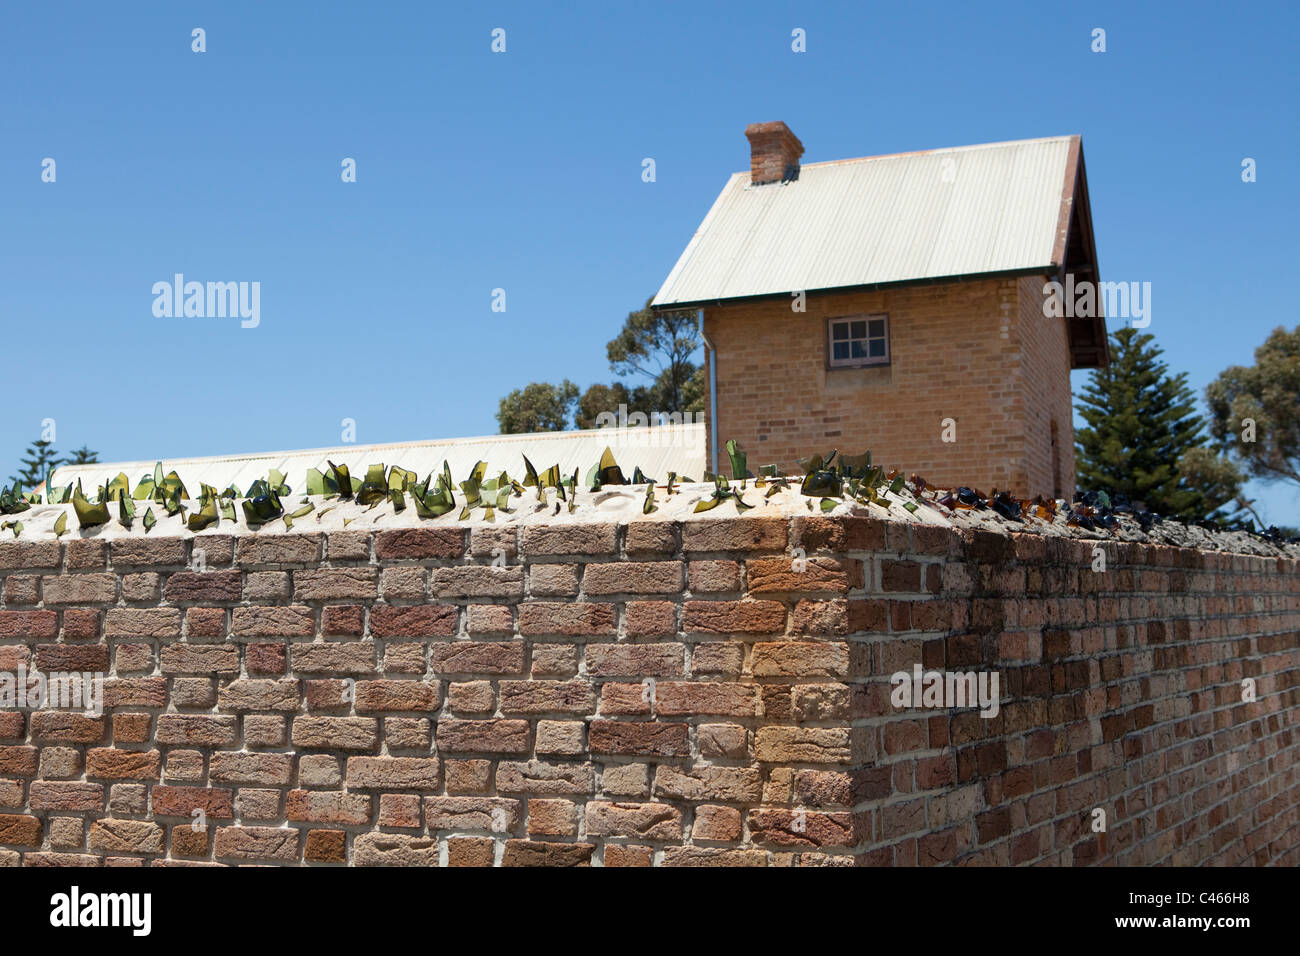 Prison walls of the Old Convict Gaol - built in 1851 and now used as a museum. Albany, Western Australia, Australia Stock Photo